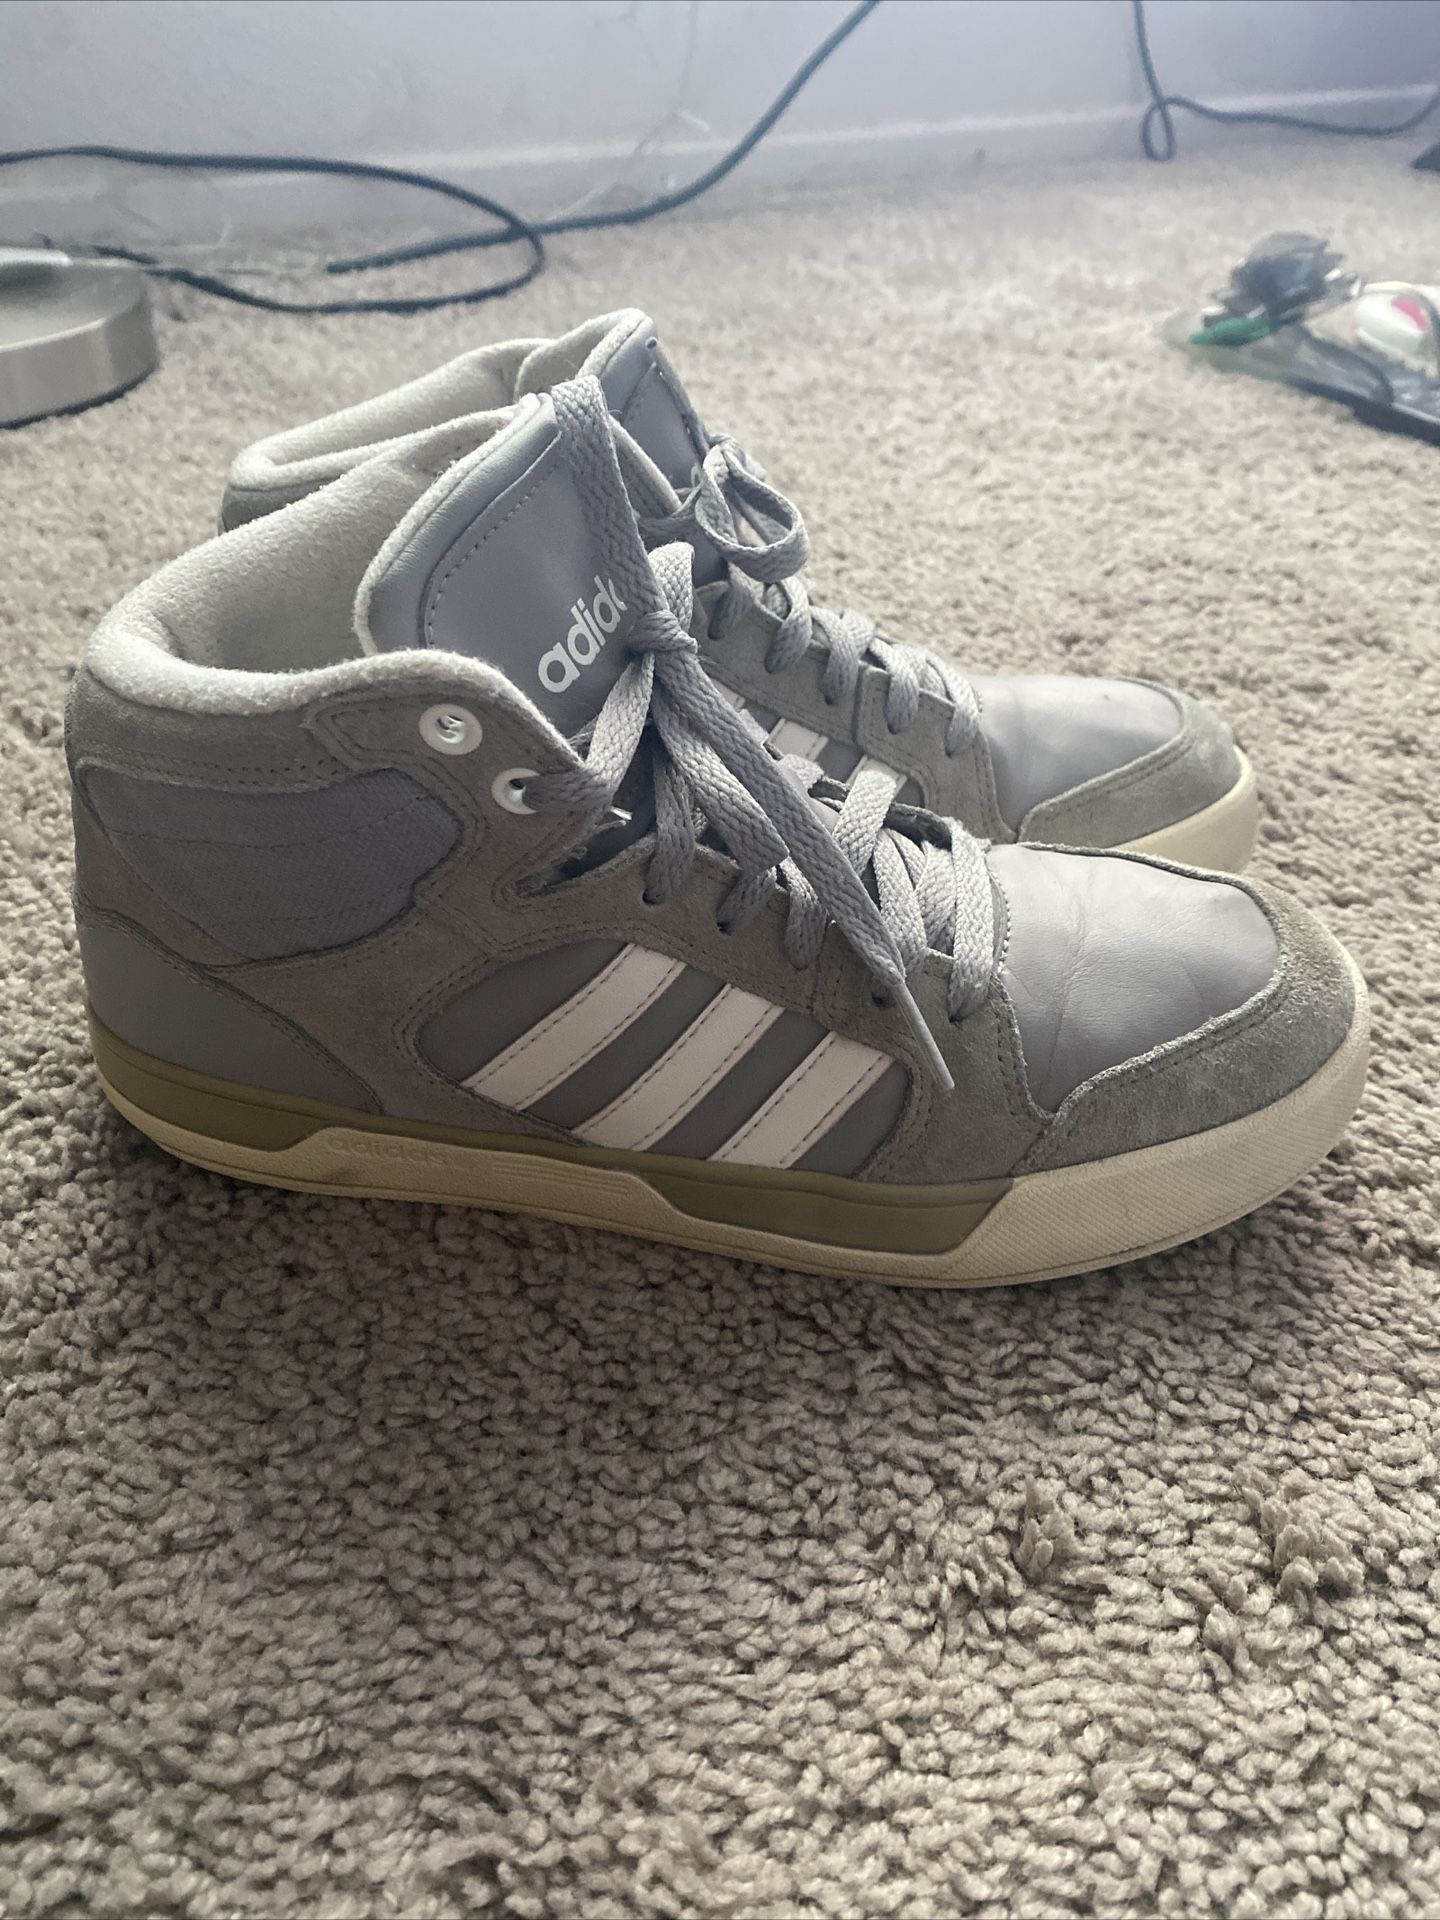 Adidas High Top Sneakers Size 6US